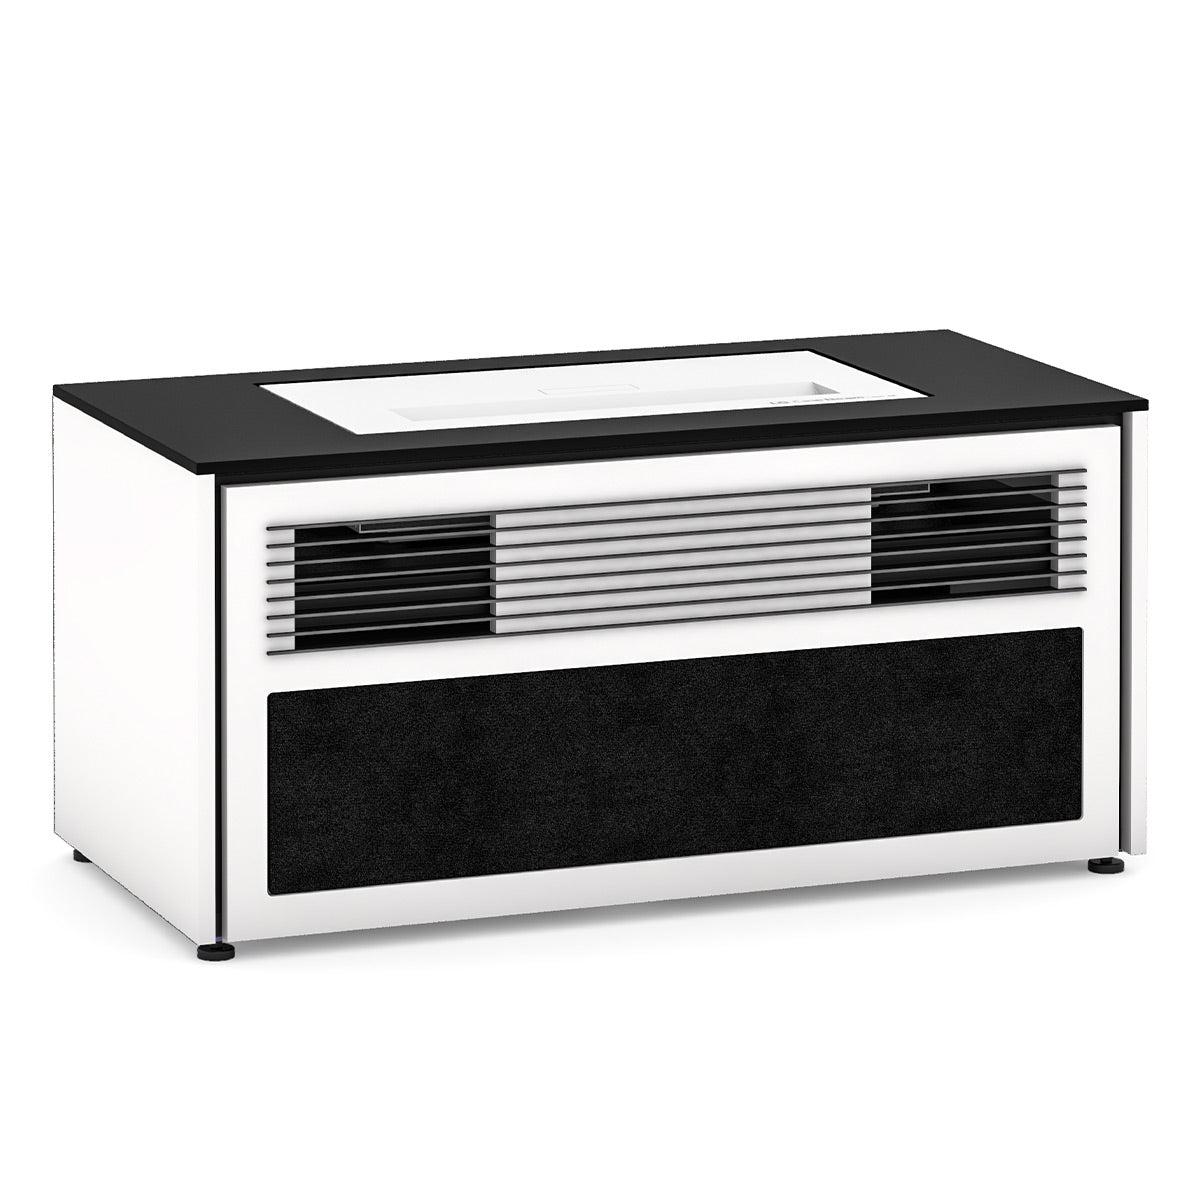 Salamander Chameleon Collection Miami 229S Dual Speaker Grill Projector Integrated Cabinet for LG HU85LA Projector (Gloss Warm White)